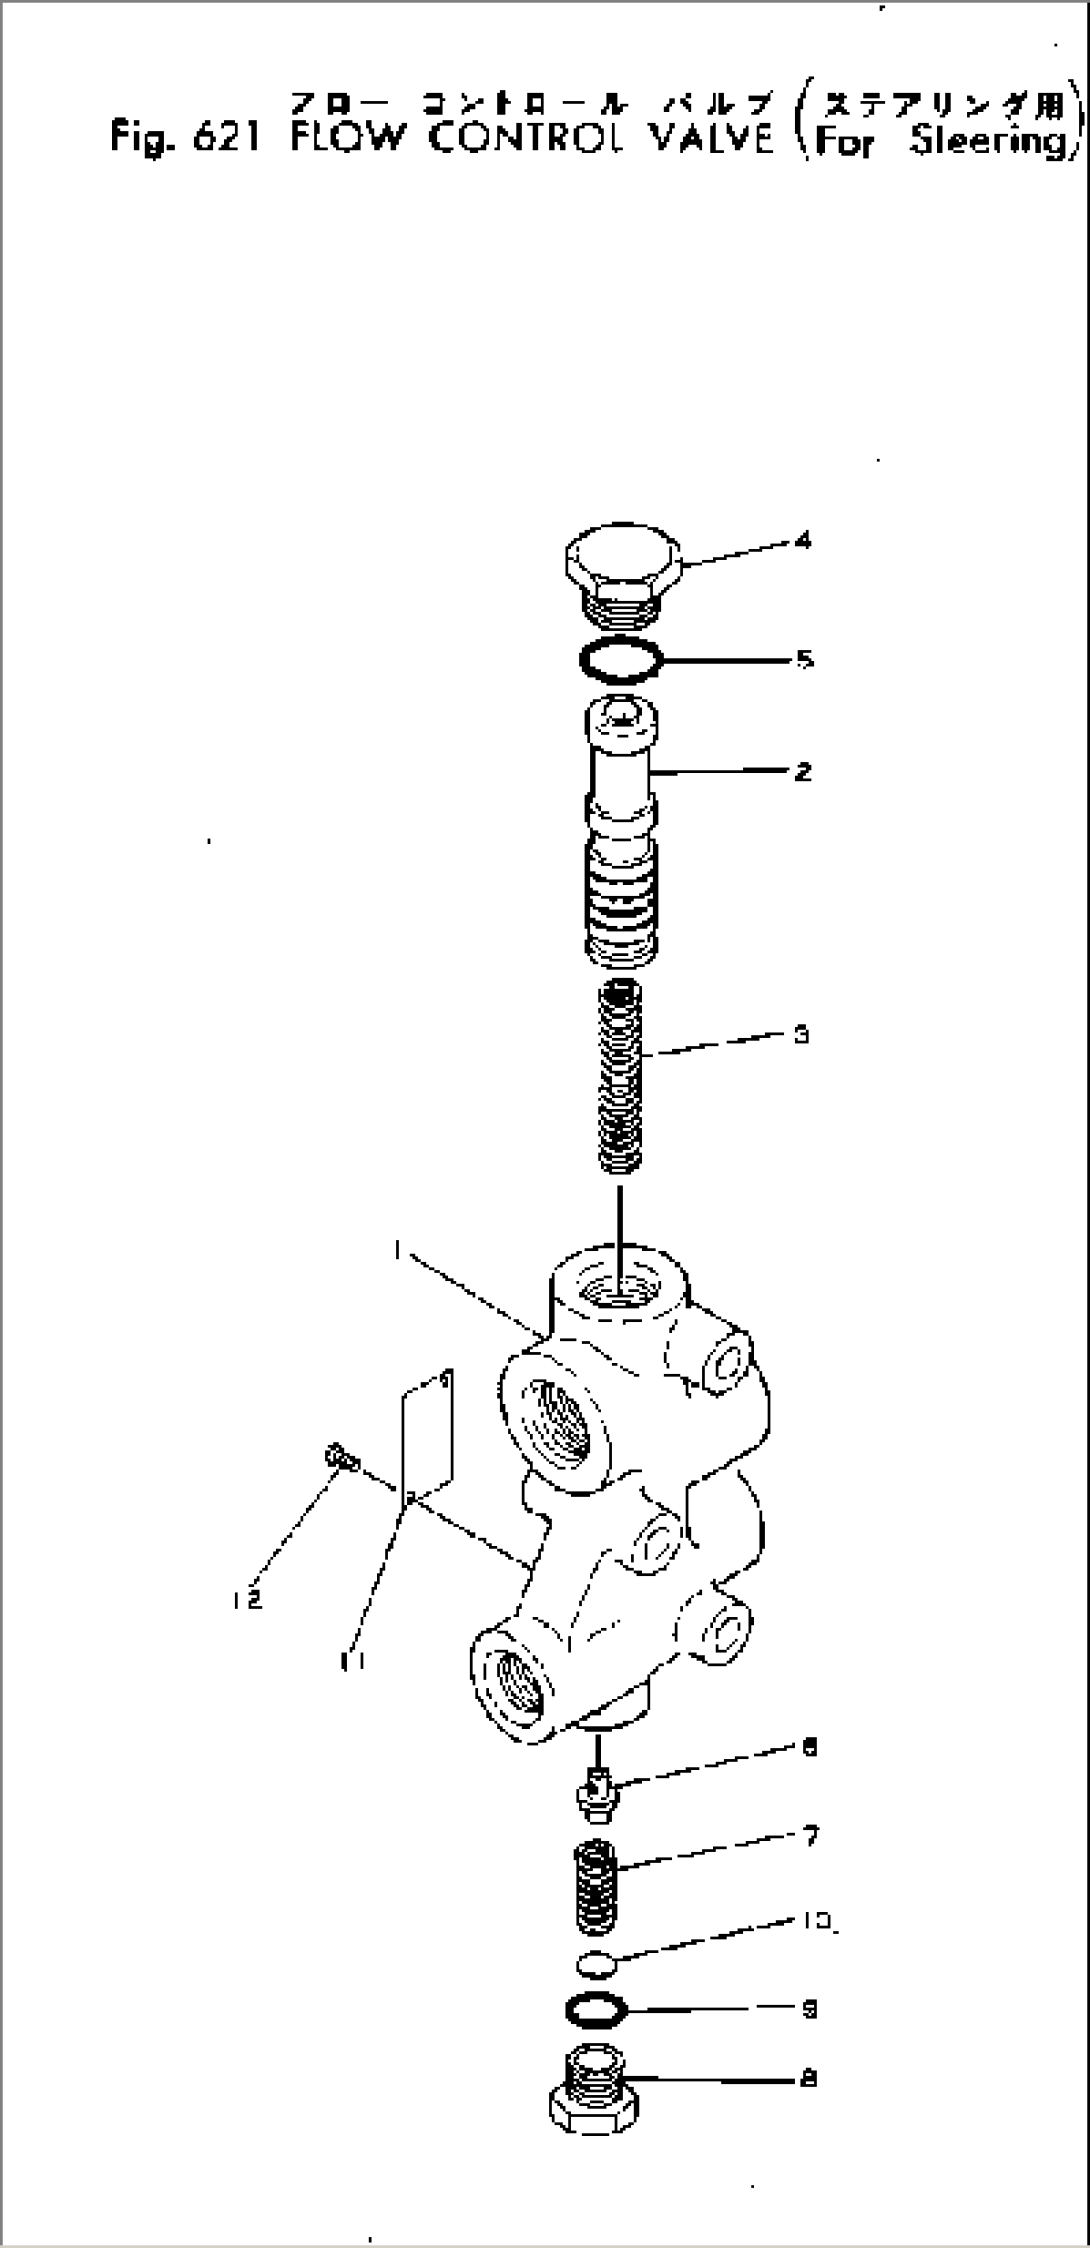 FLOW CONTROL VALVE (FOR STEERING)